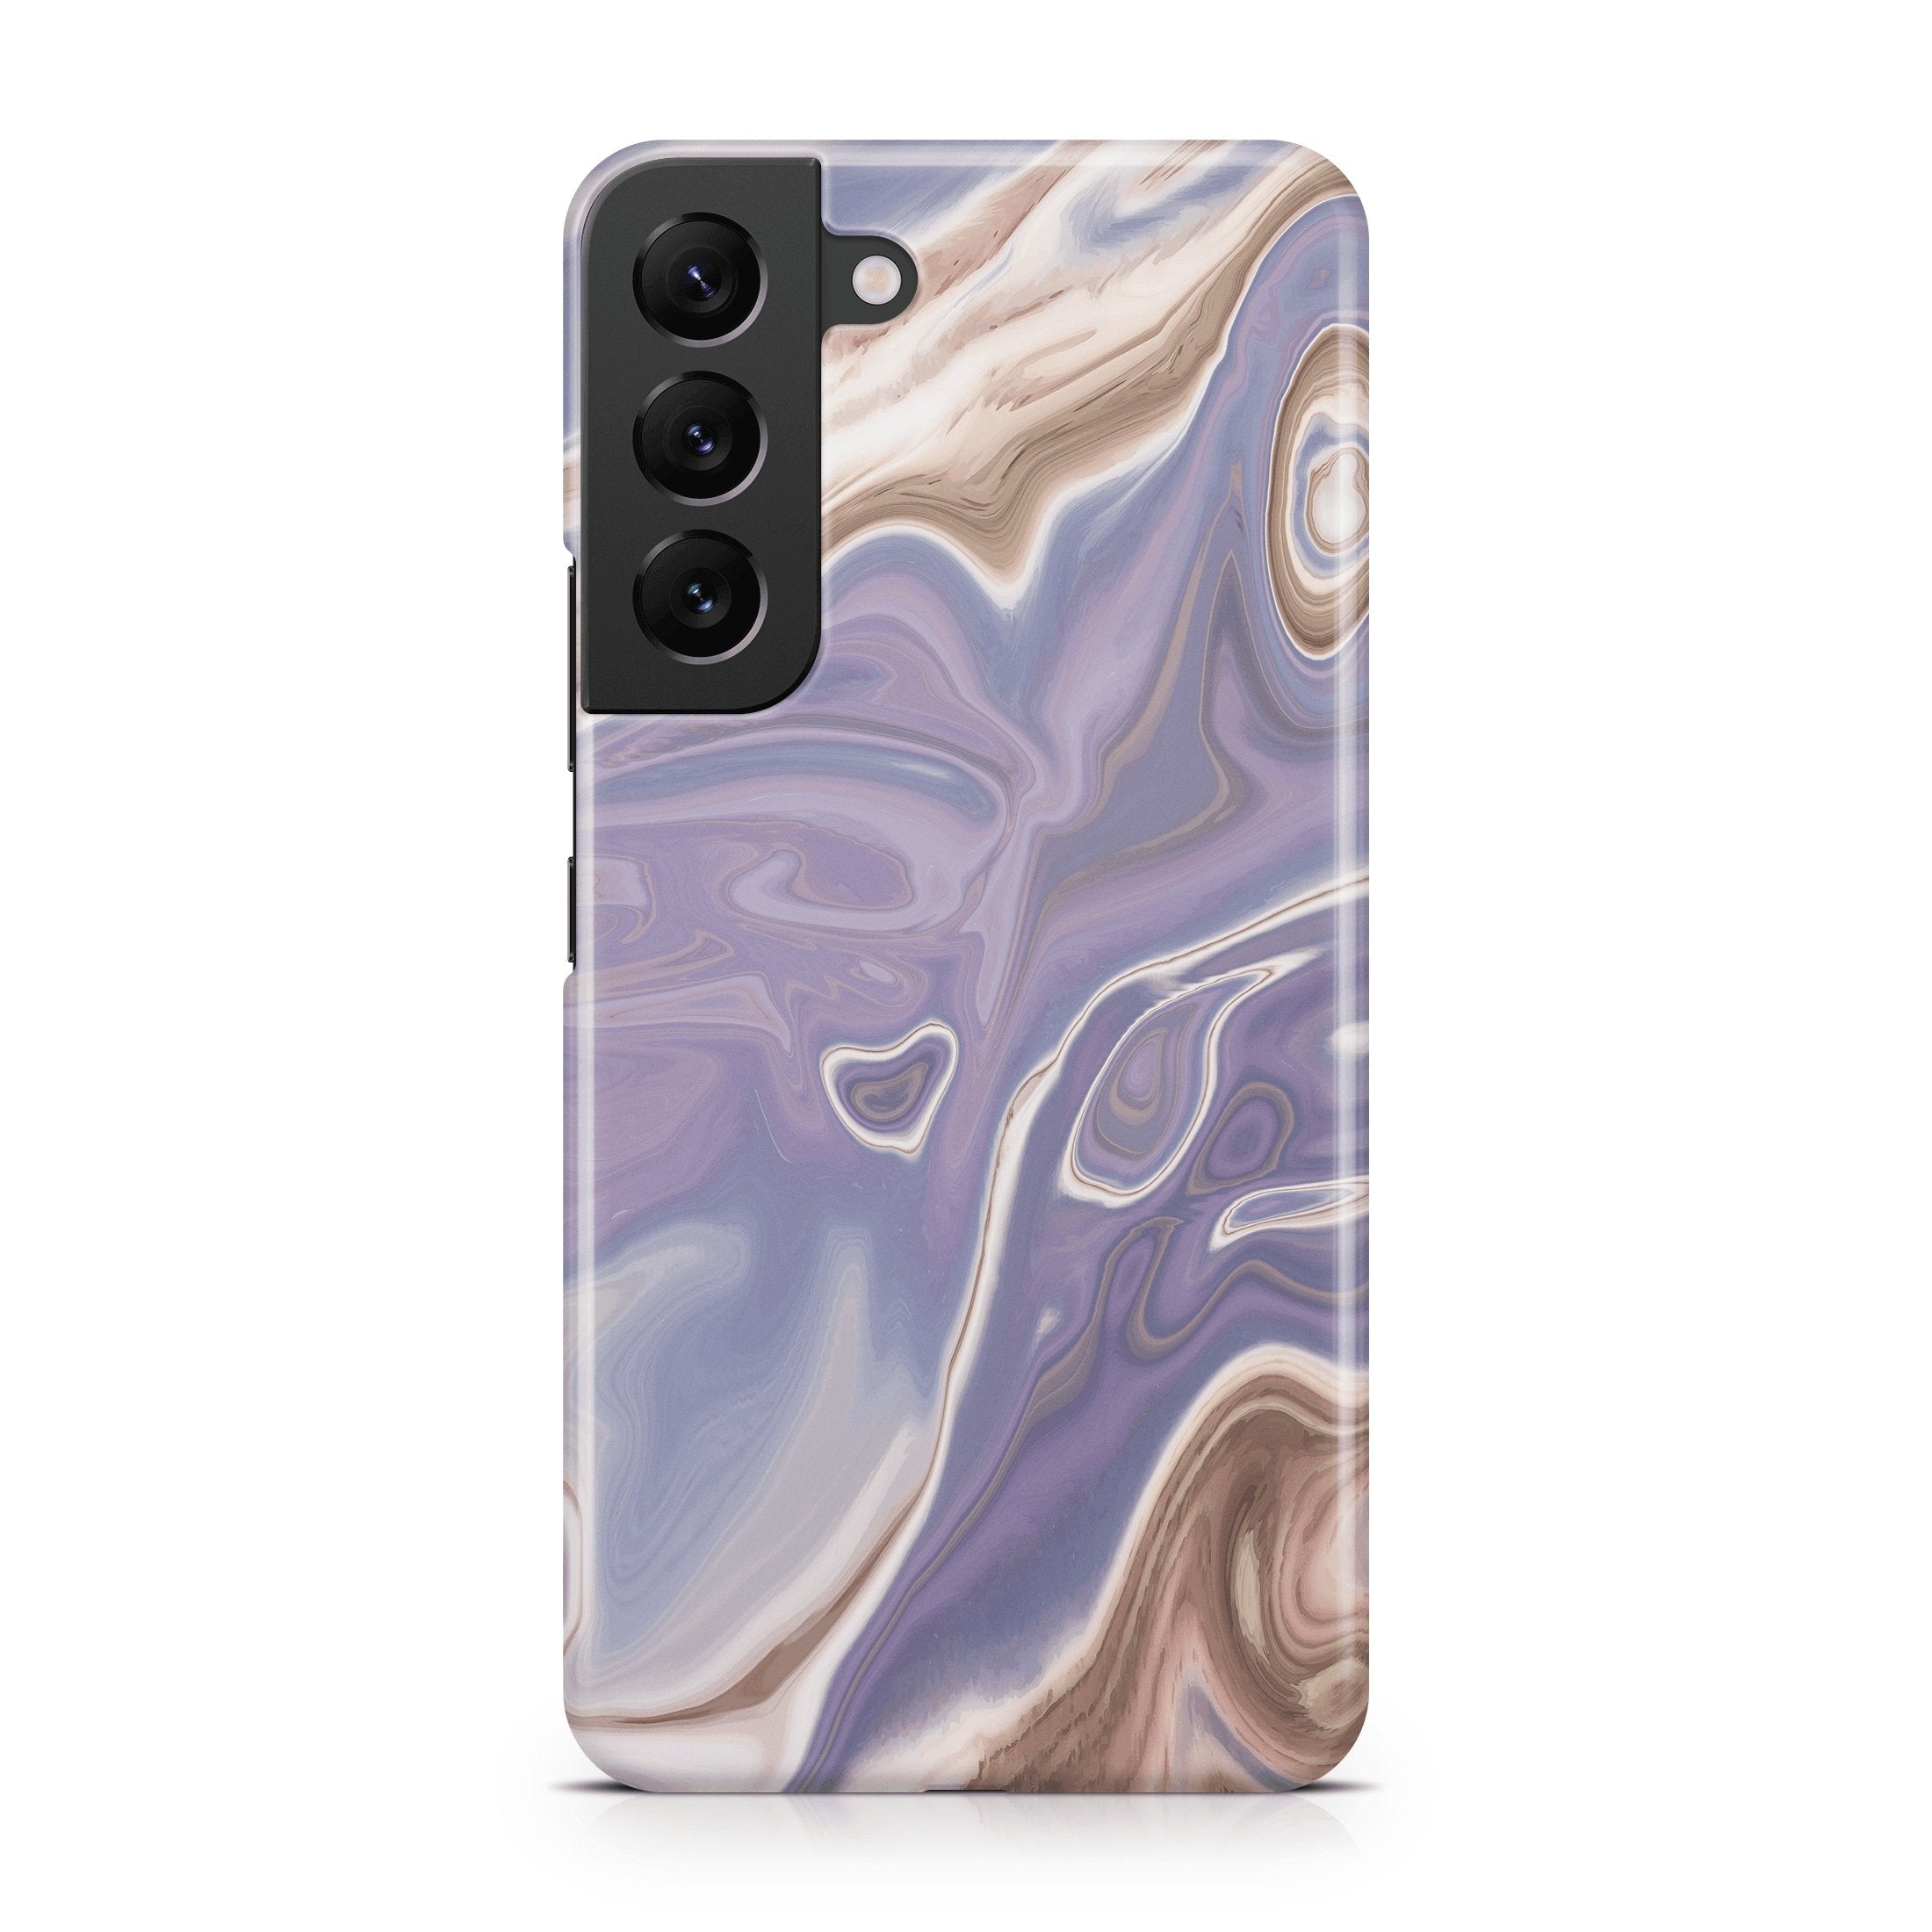 Southwest Agate - Samsung phone case designs by CaseSwagger